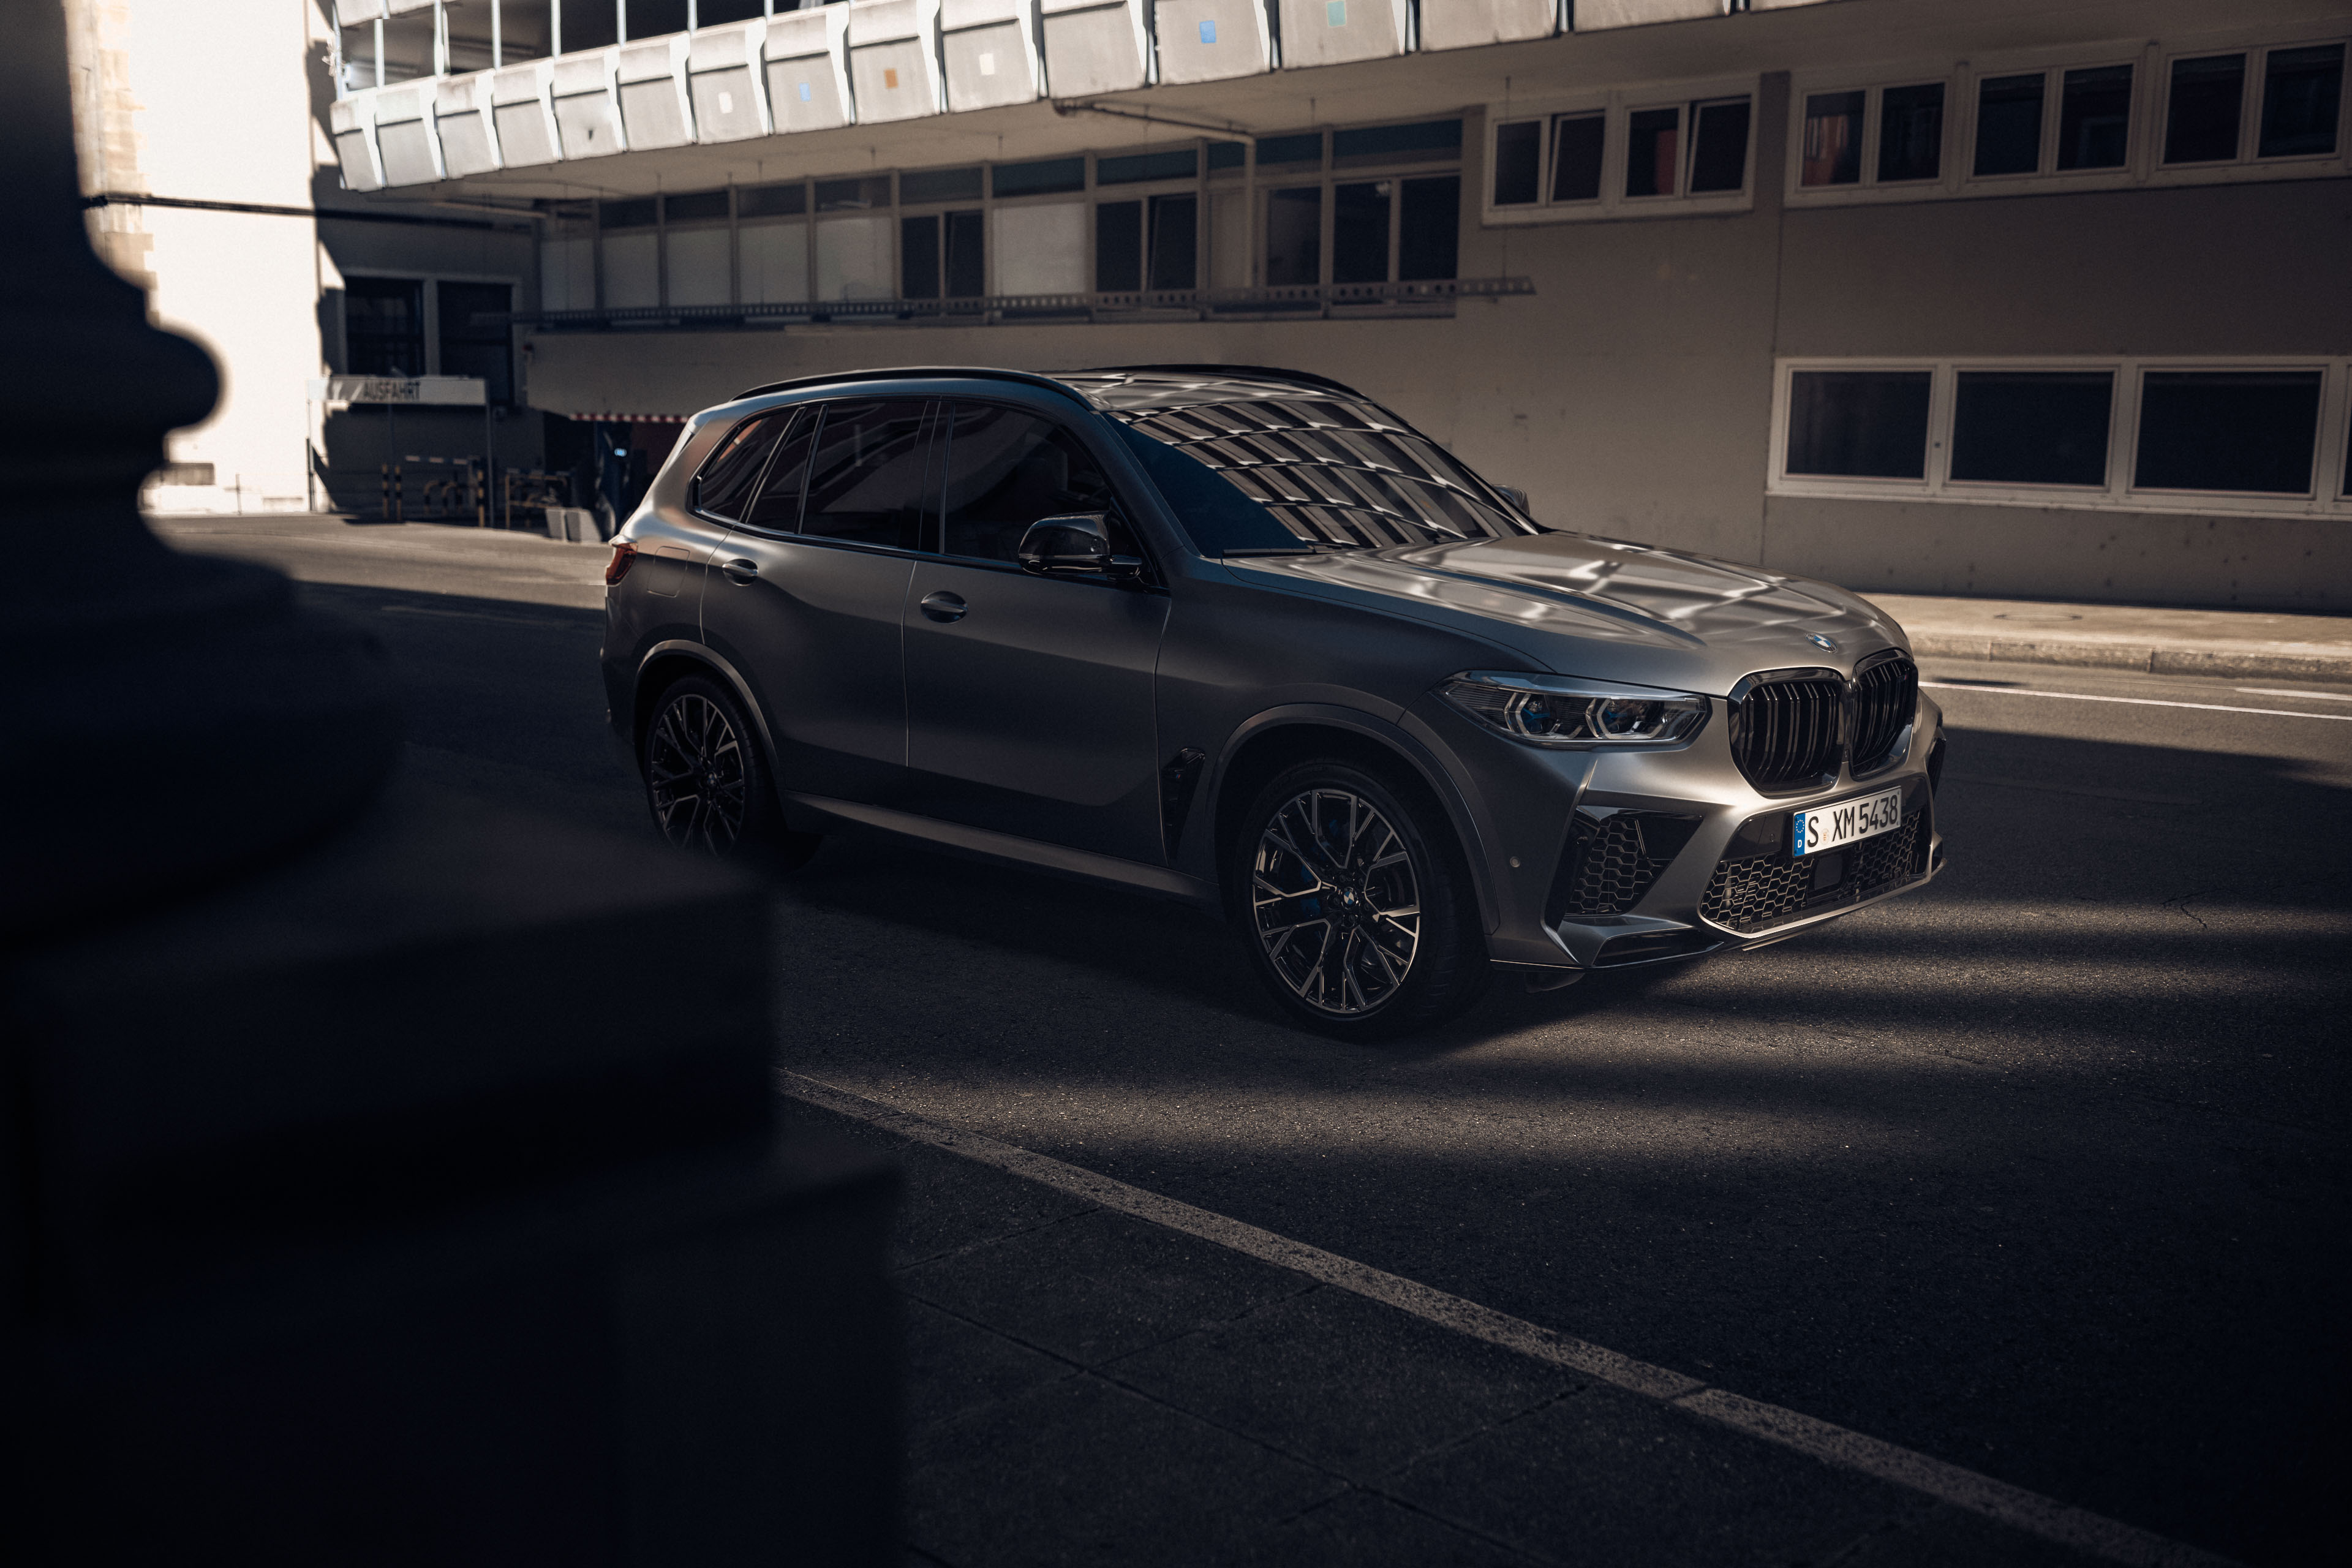 THE X5 M